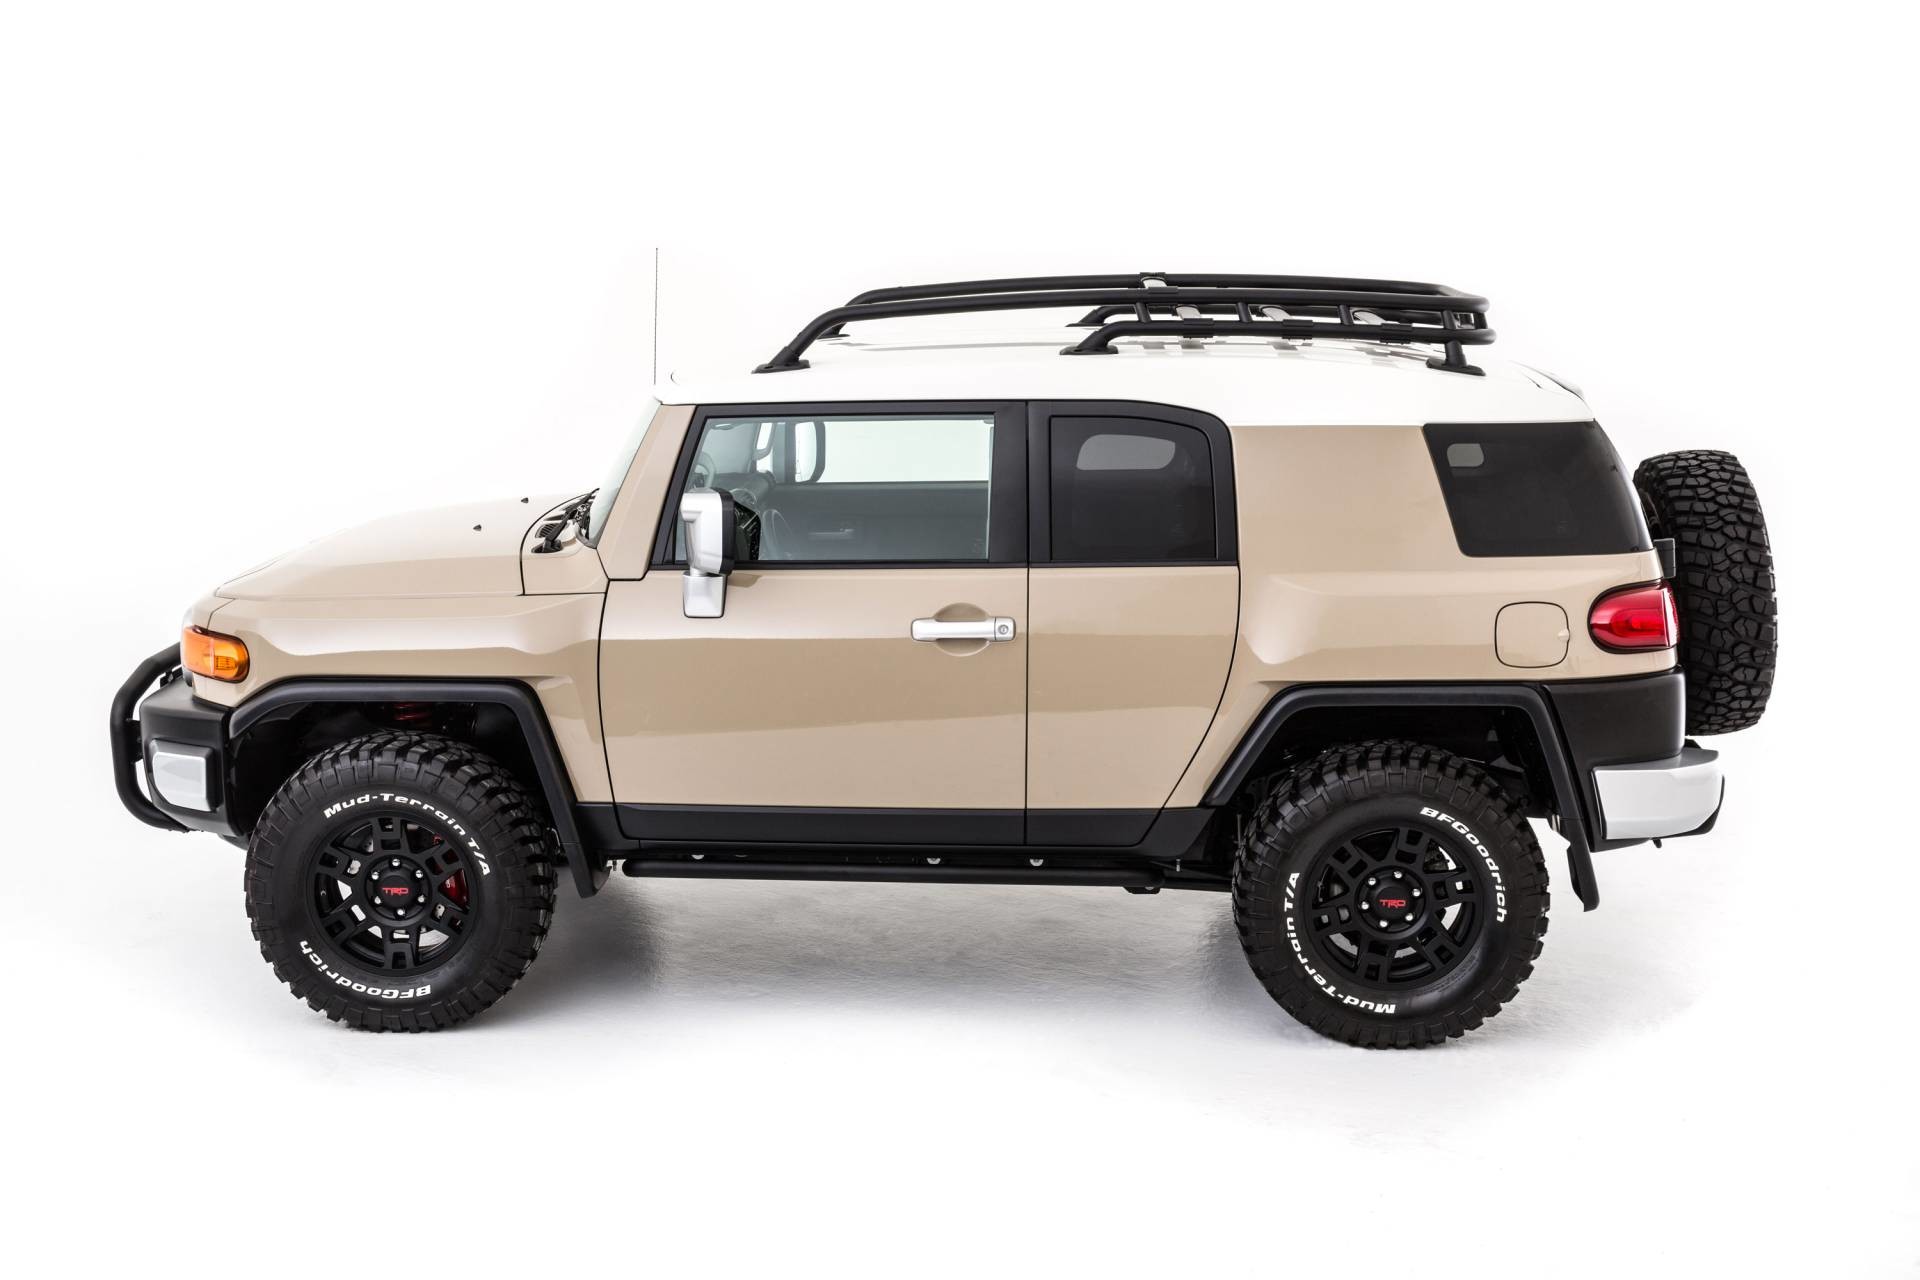 1920x1280 2013 Toyota FJ Cruiser TRD-Tuned Concept Pictures, News, Research, Pricing  - conceptcarz.com